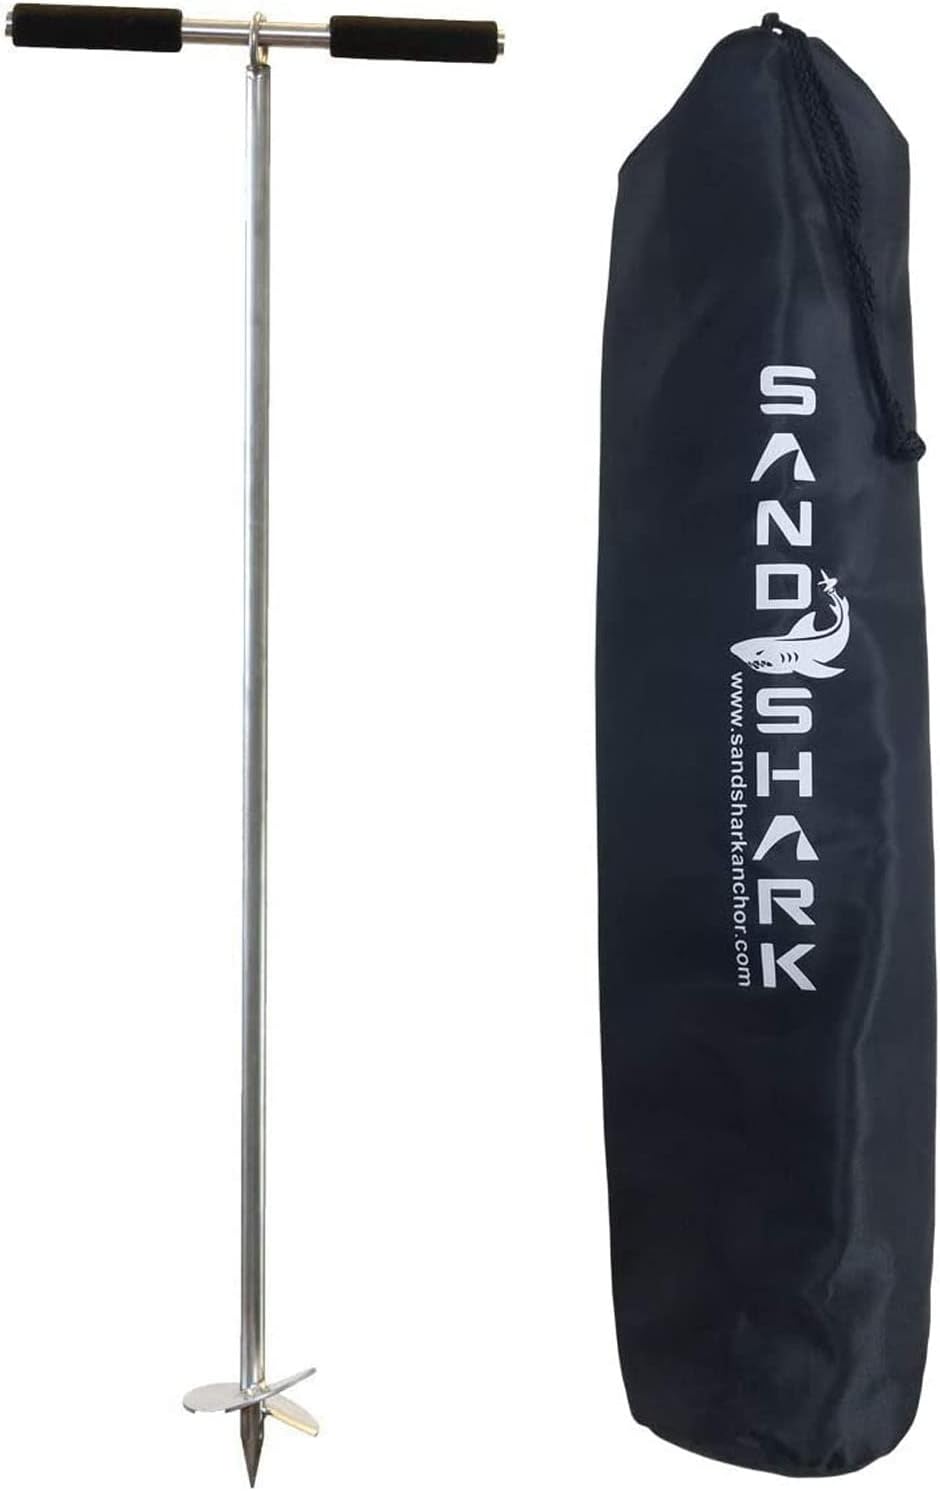 SandShark Lite Series Boat Anchor - Shallow Water Anchor Pole - Jet Ski Anchor, Kayak Anchor, Pontoon Boat Accessories for Beach and Sandbar - 316 Stainless Steel w/Handle and Padded Case